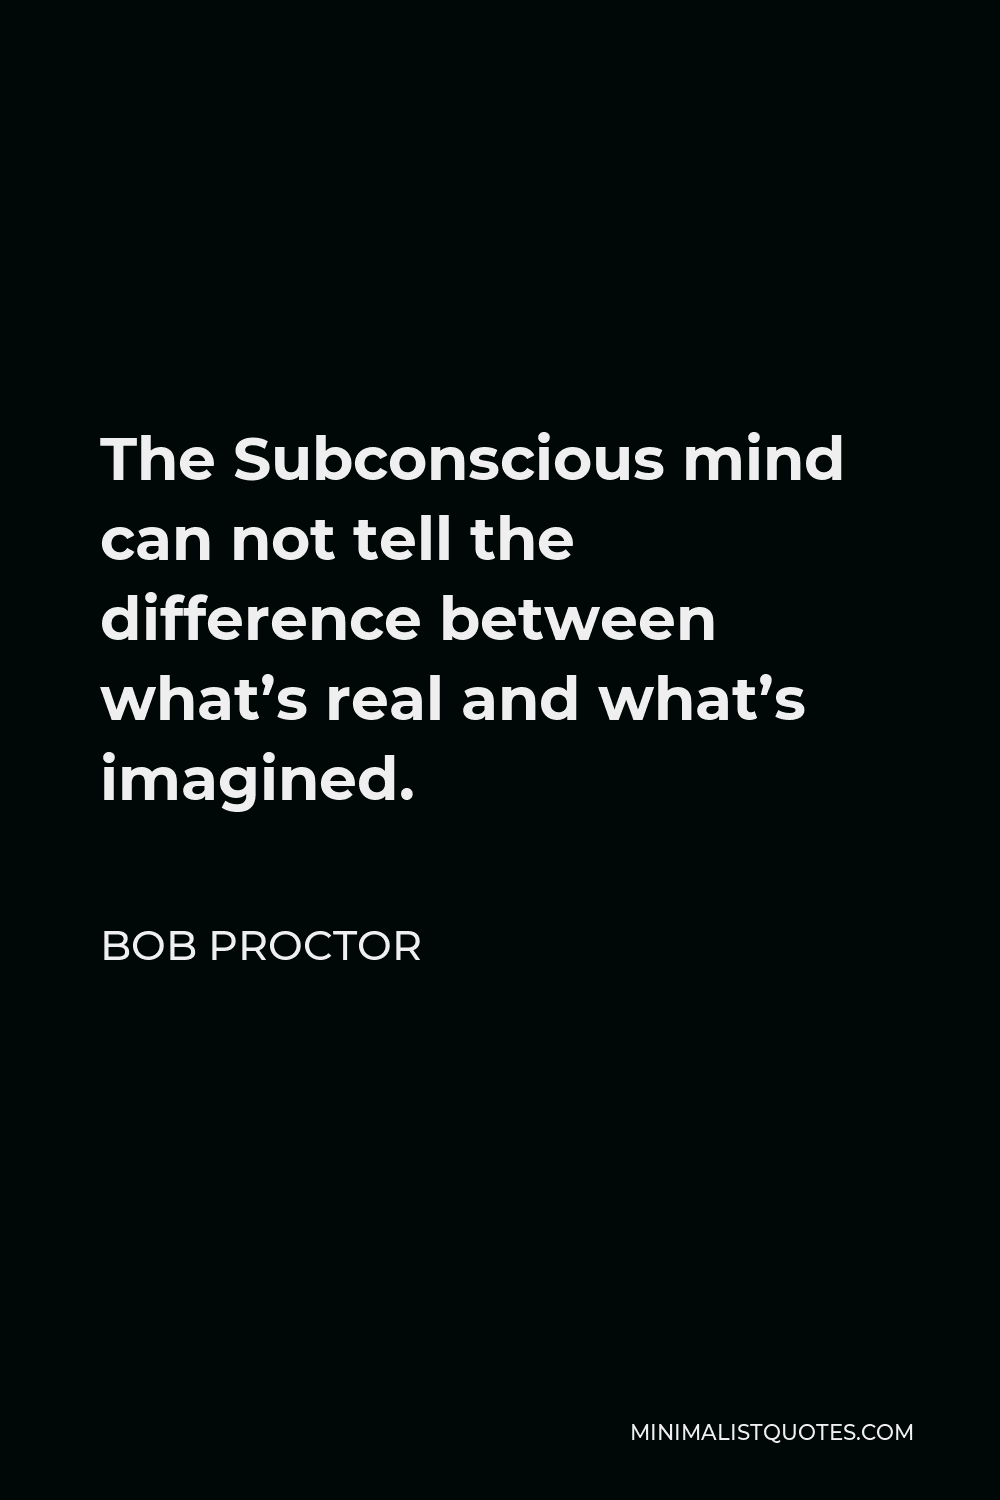 Bob Proctor Quote - The Subconscious mind can not tell the difference between what’s real and what’s imagined.